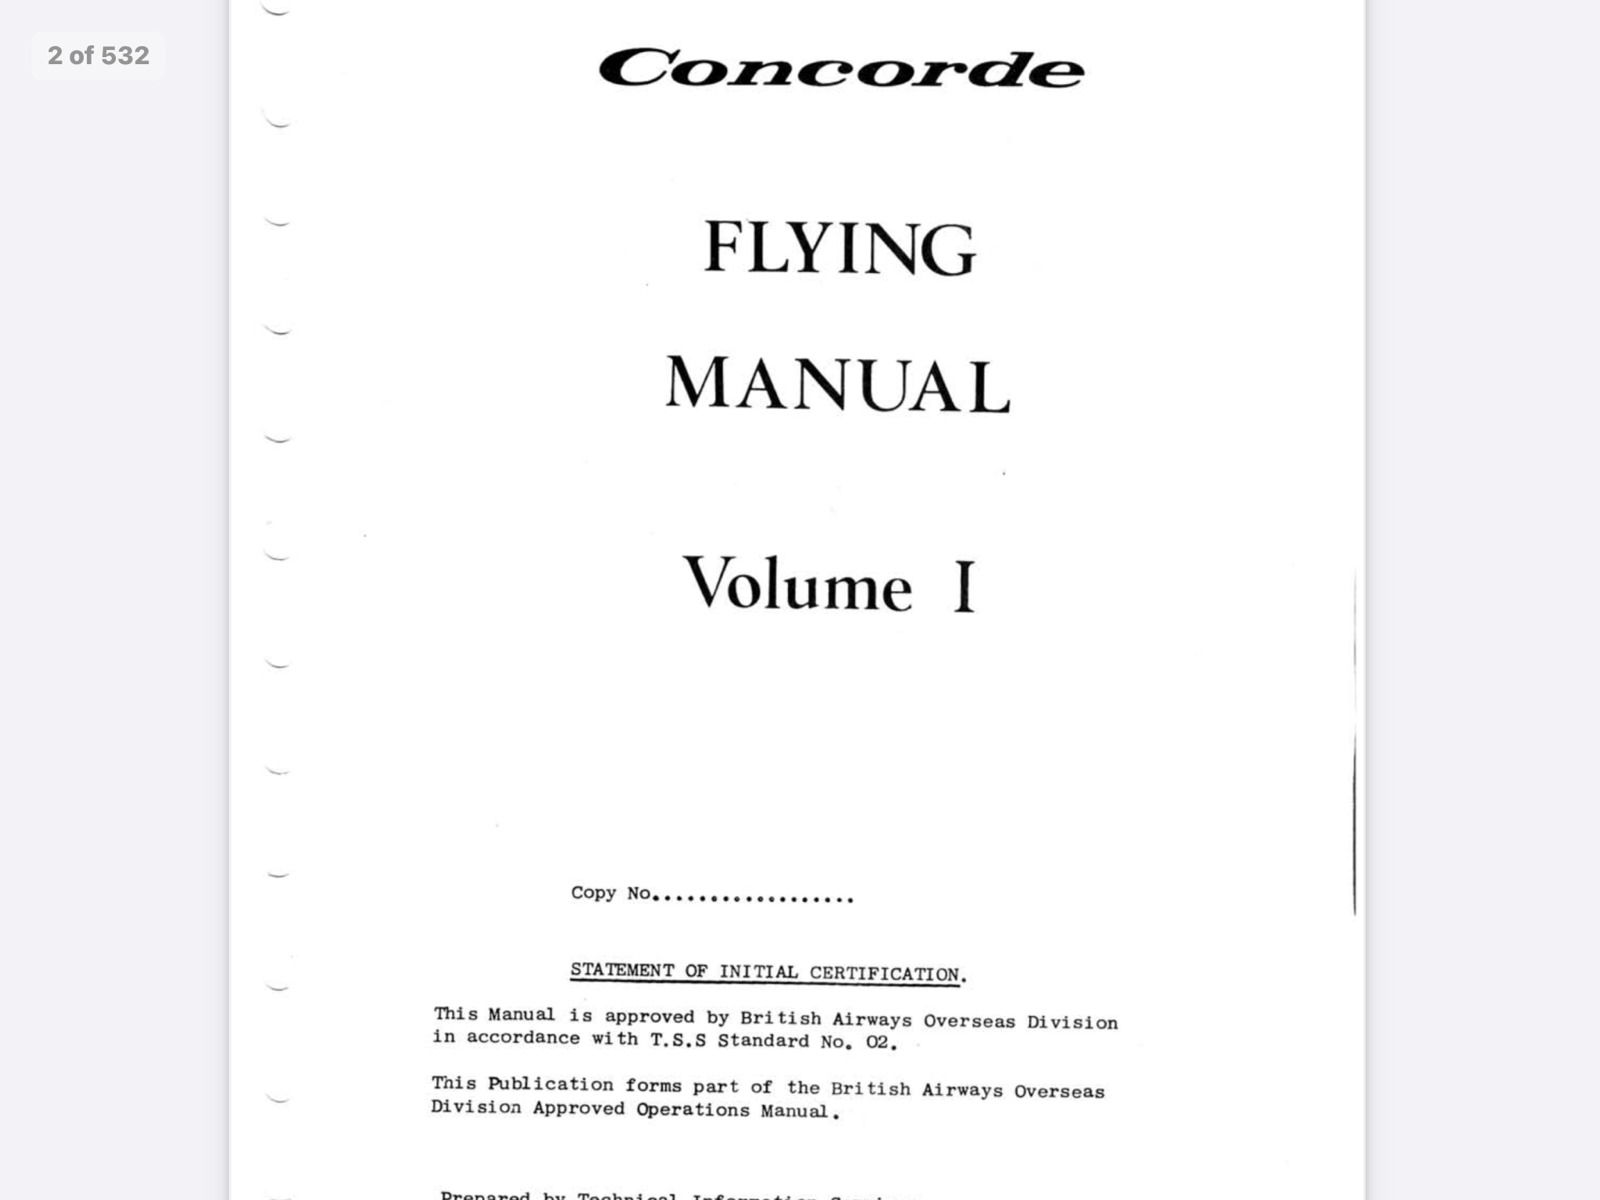 Concorde 1500 page Flying Manuals  + Many  Extras Sent via wetransfer pdf